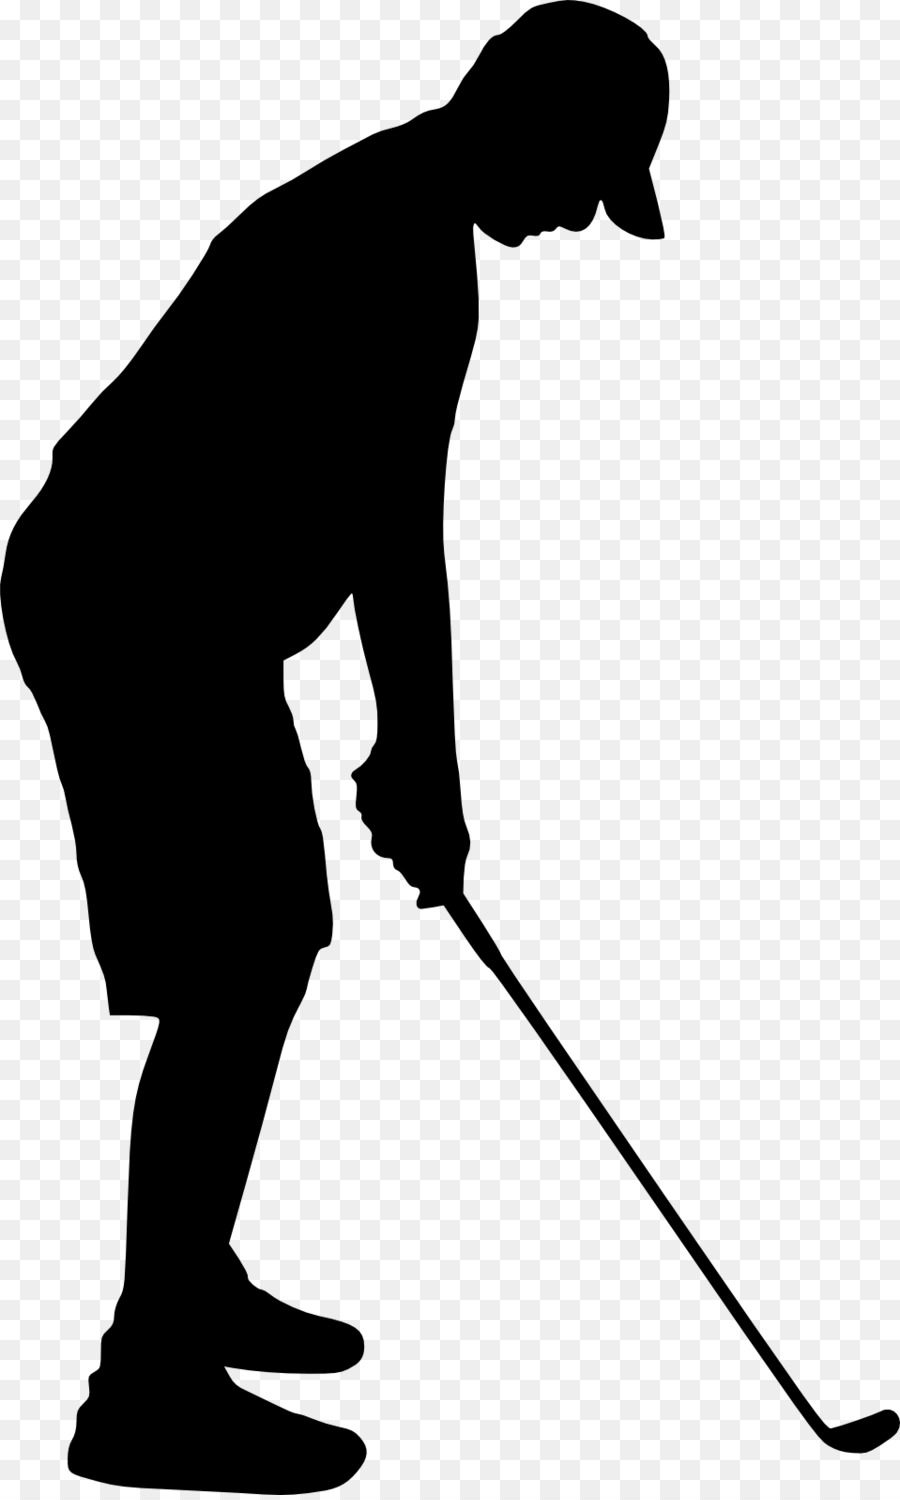 Silhouette Golfer Clip art - silhouette png download - 959*1593 - Free Transparent Silhouette png Download.